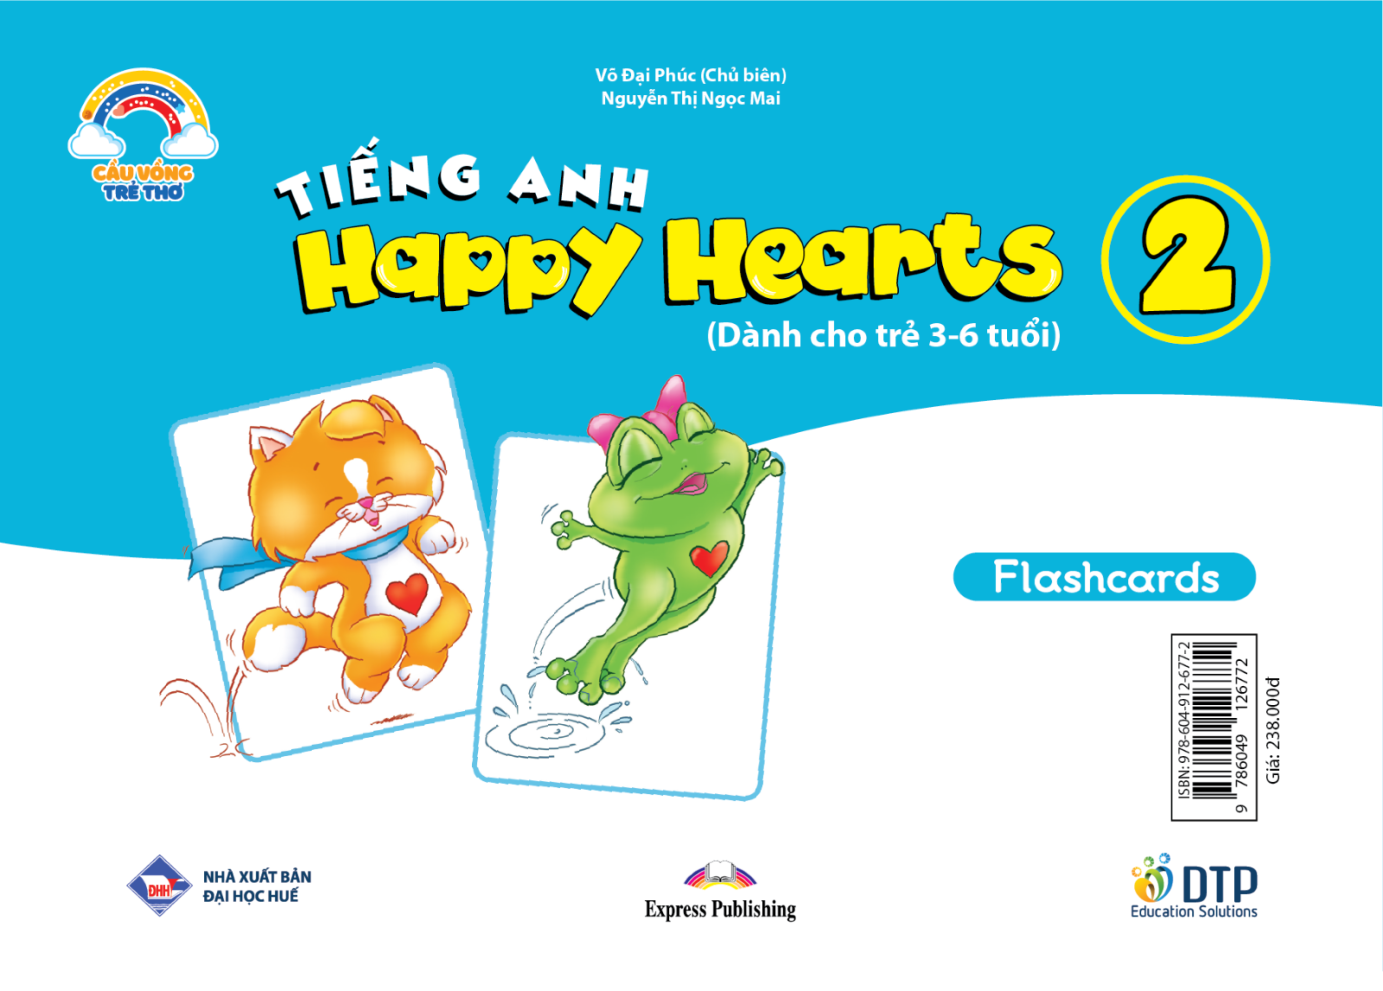 Tiếng Anh Happy Hearts 2 - Flashcards